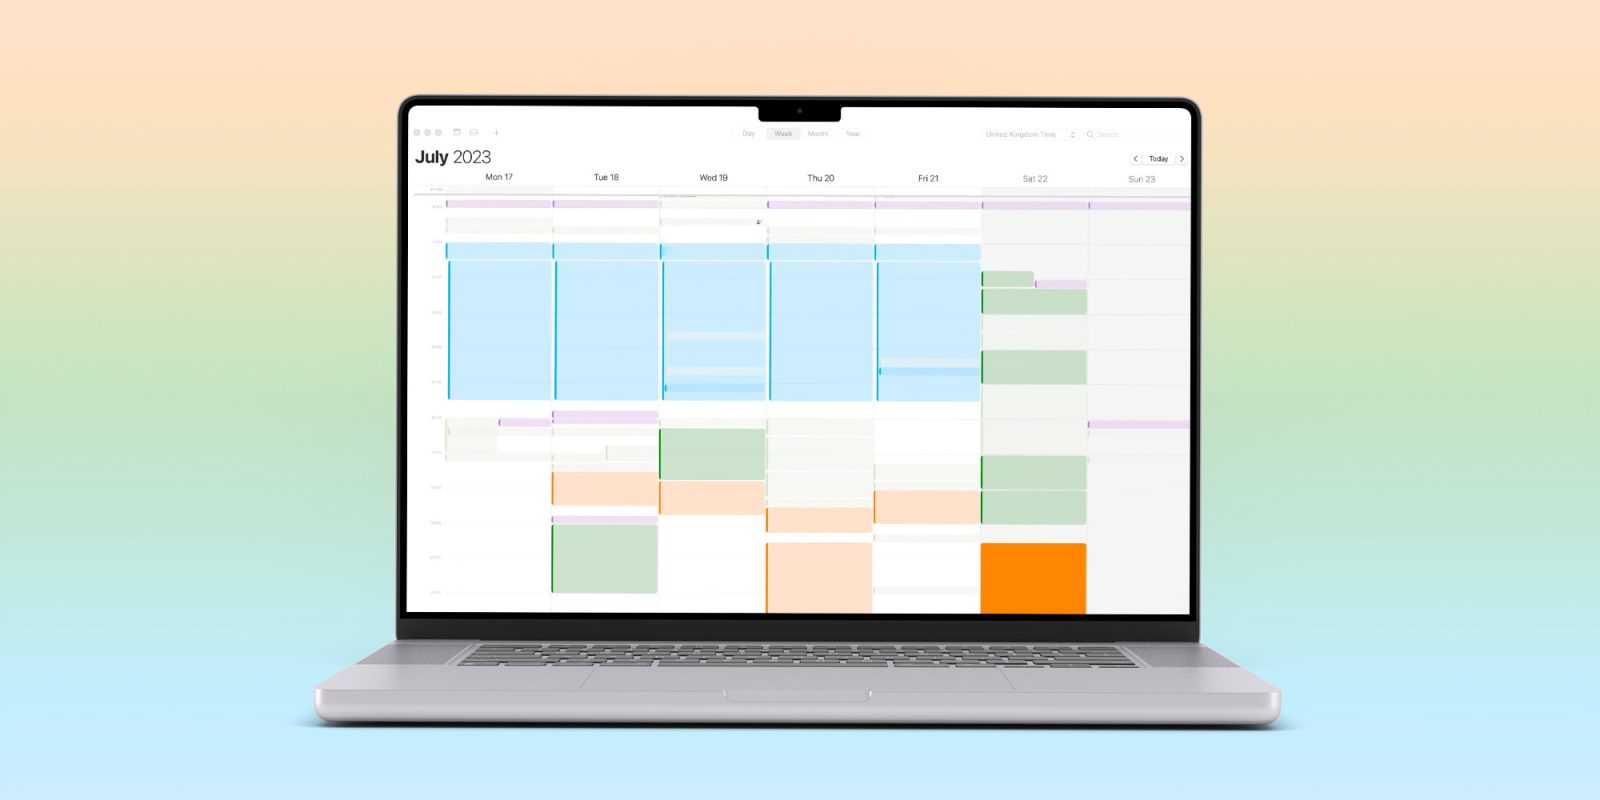 Work life everything balance | Pixellated color-coded calendar screenshot